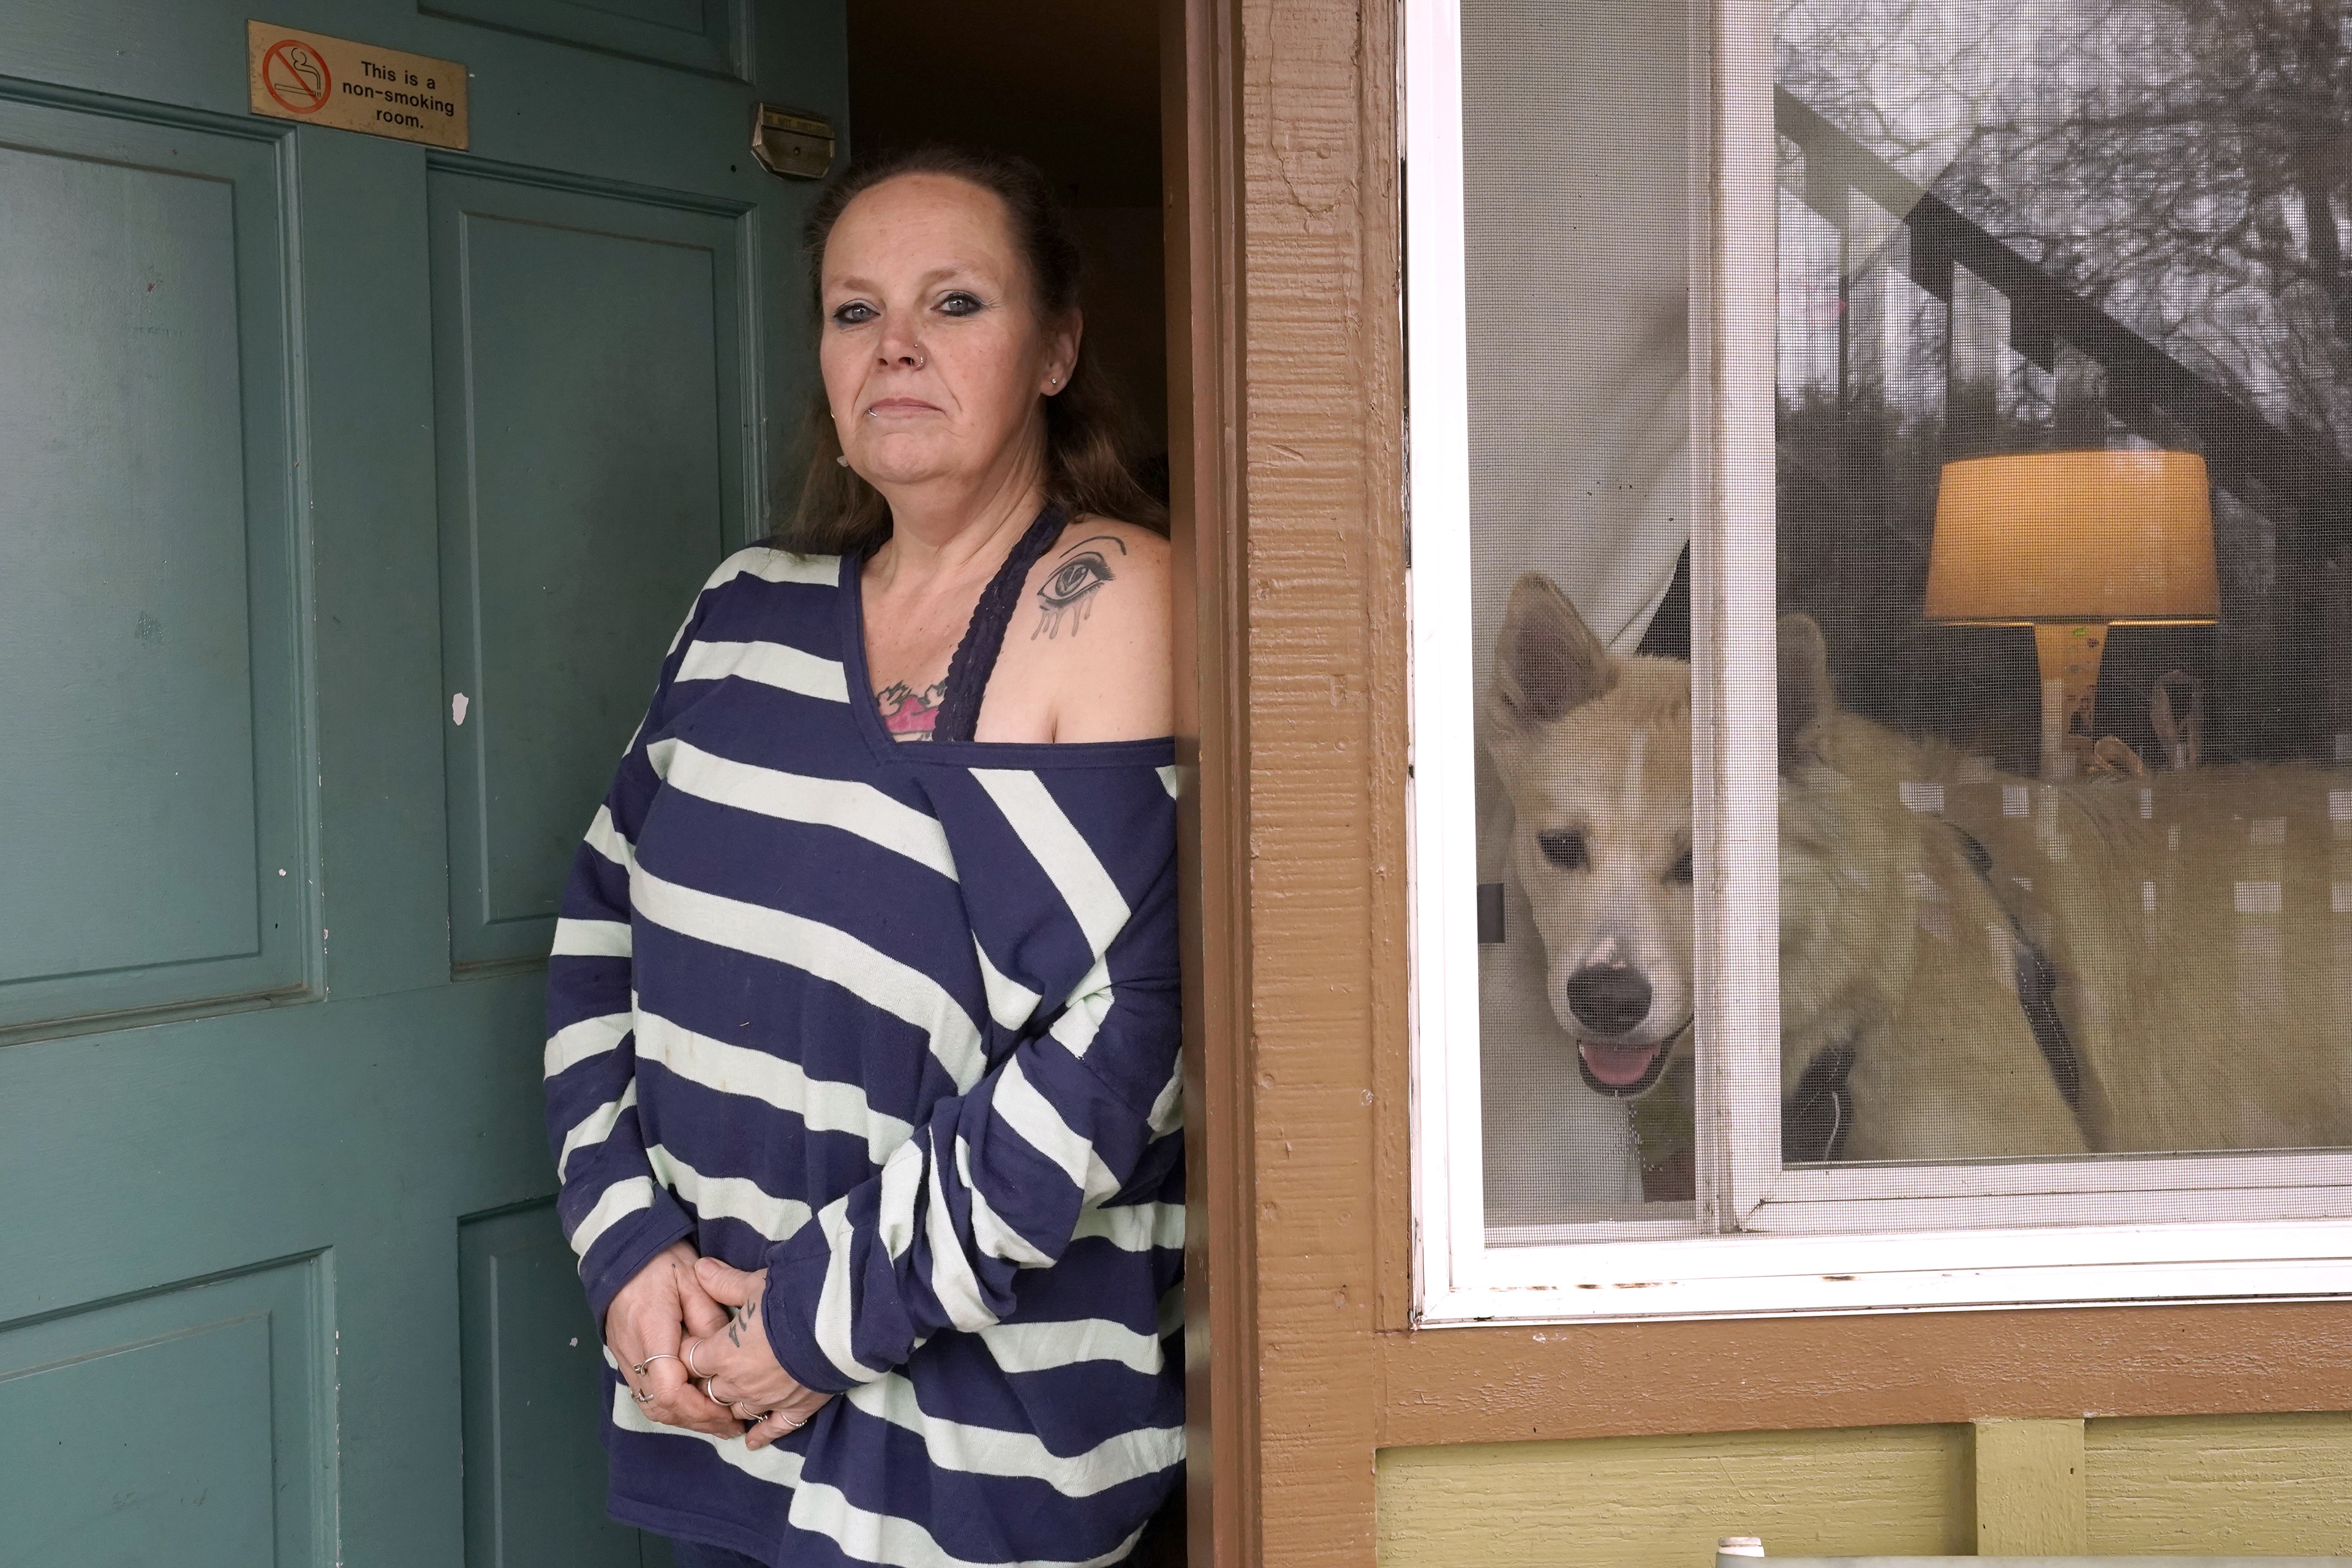 Stephanie Lammers stands in the front door of her house and looks directly towards the camera. Her dog is visible in the window beside her.